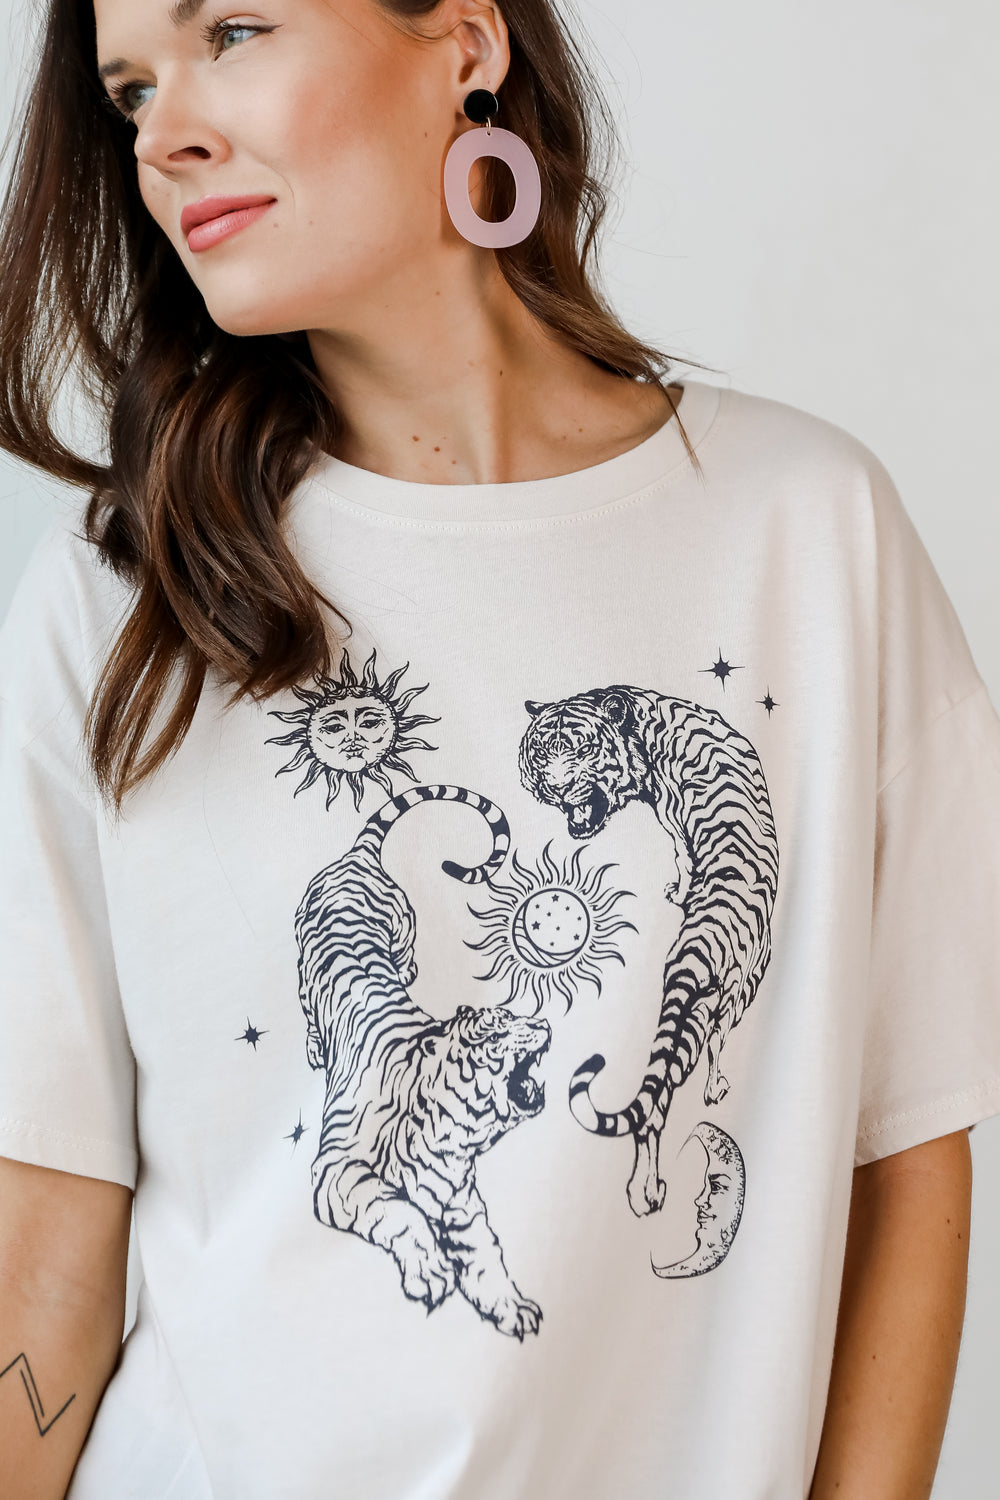 Tiger Graphic Tee from dress up